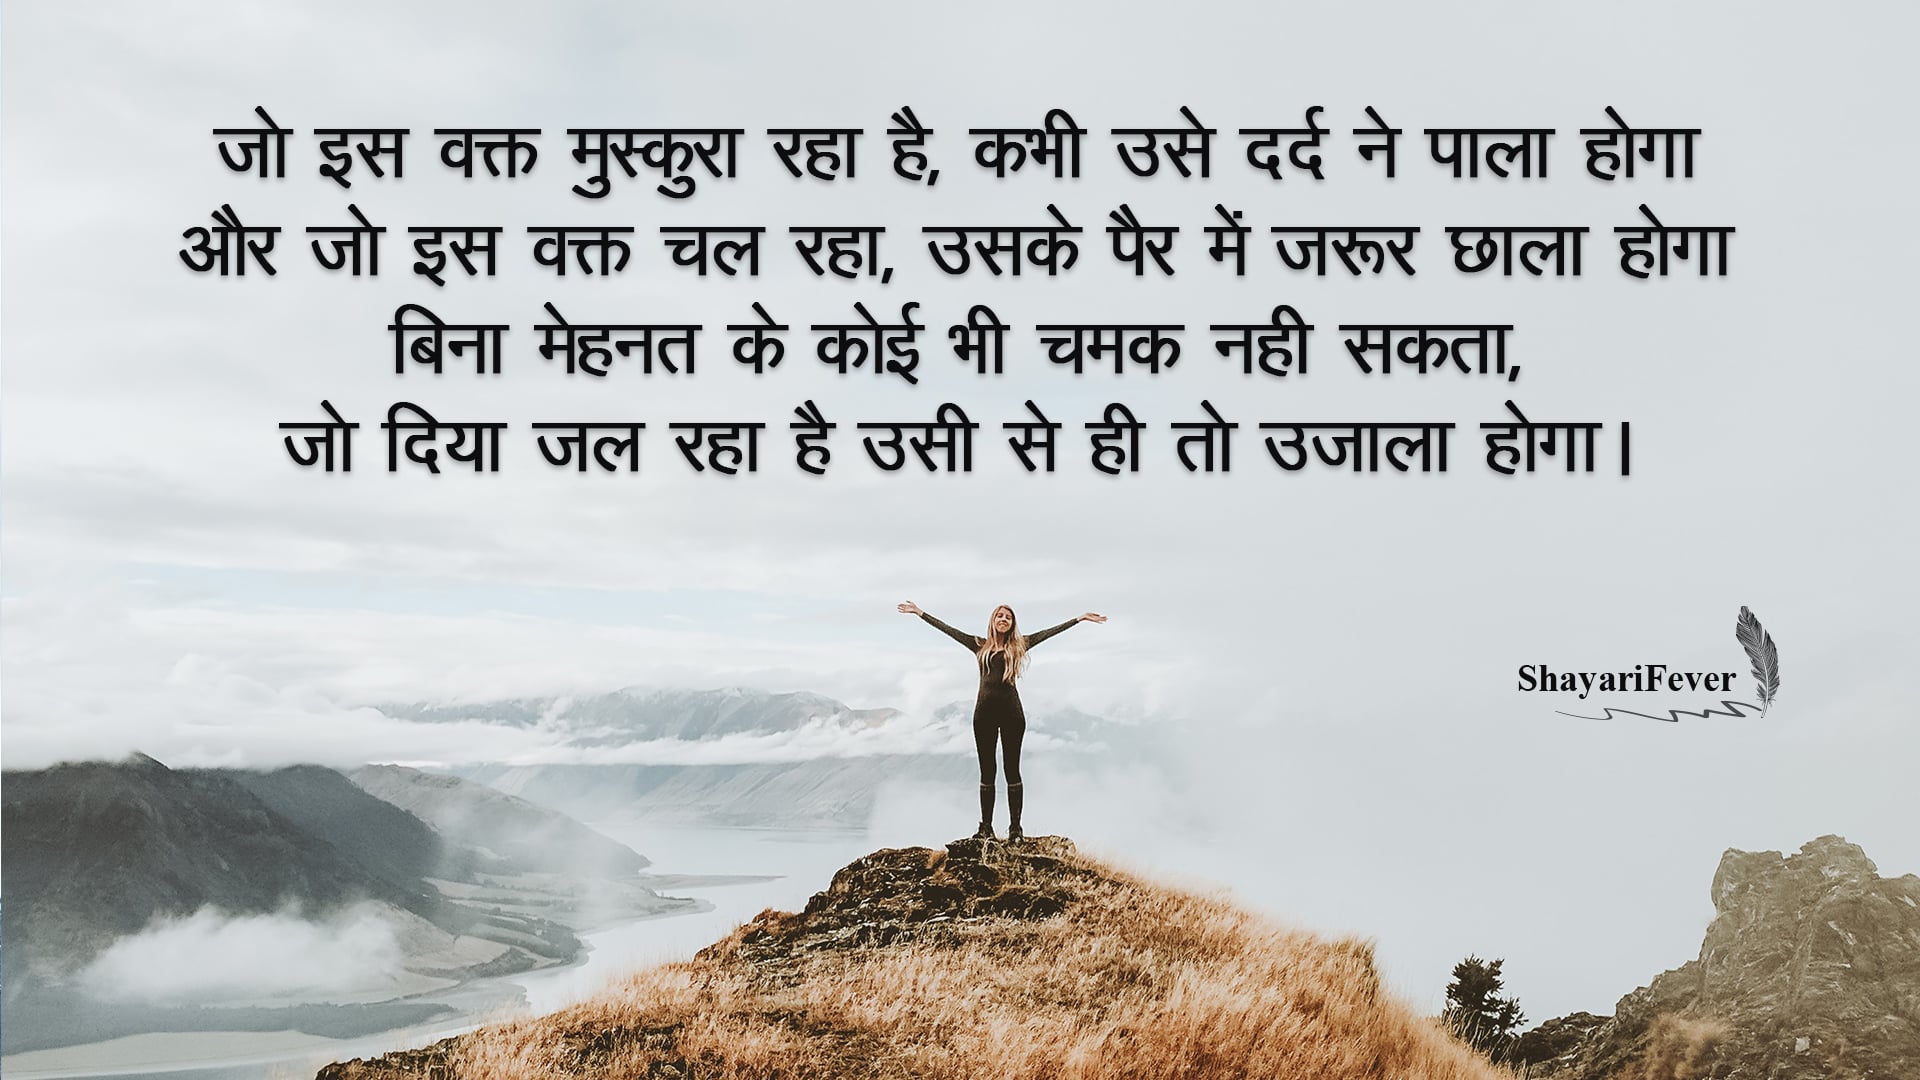 √ Motivational Quotes 2019 In Hindi